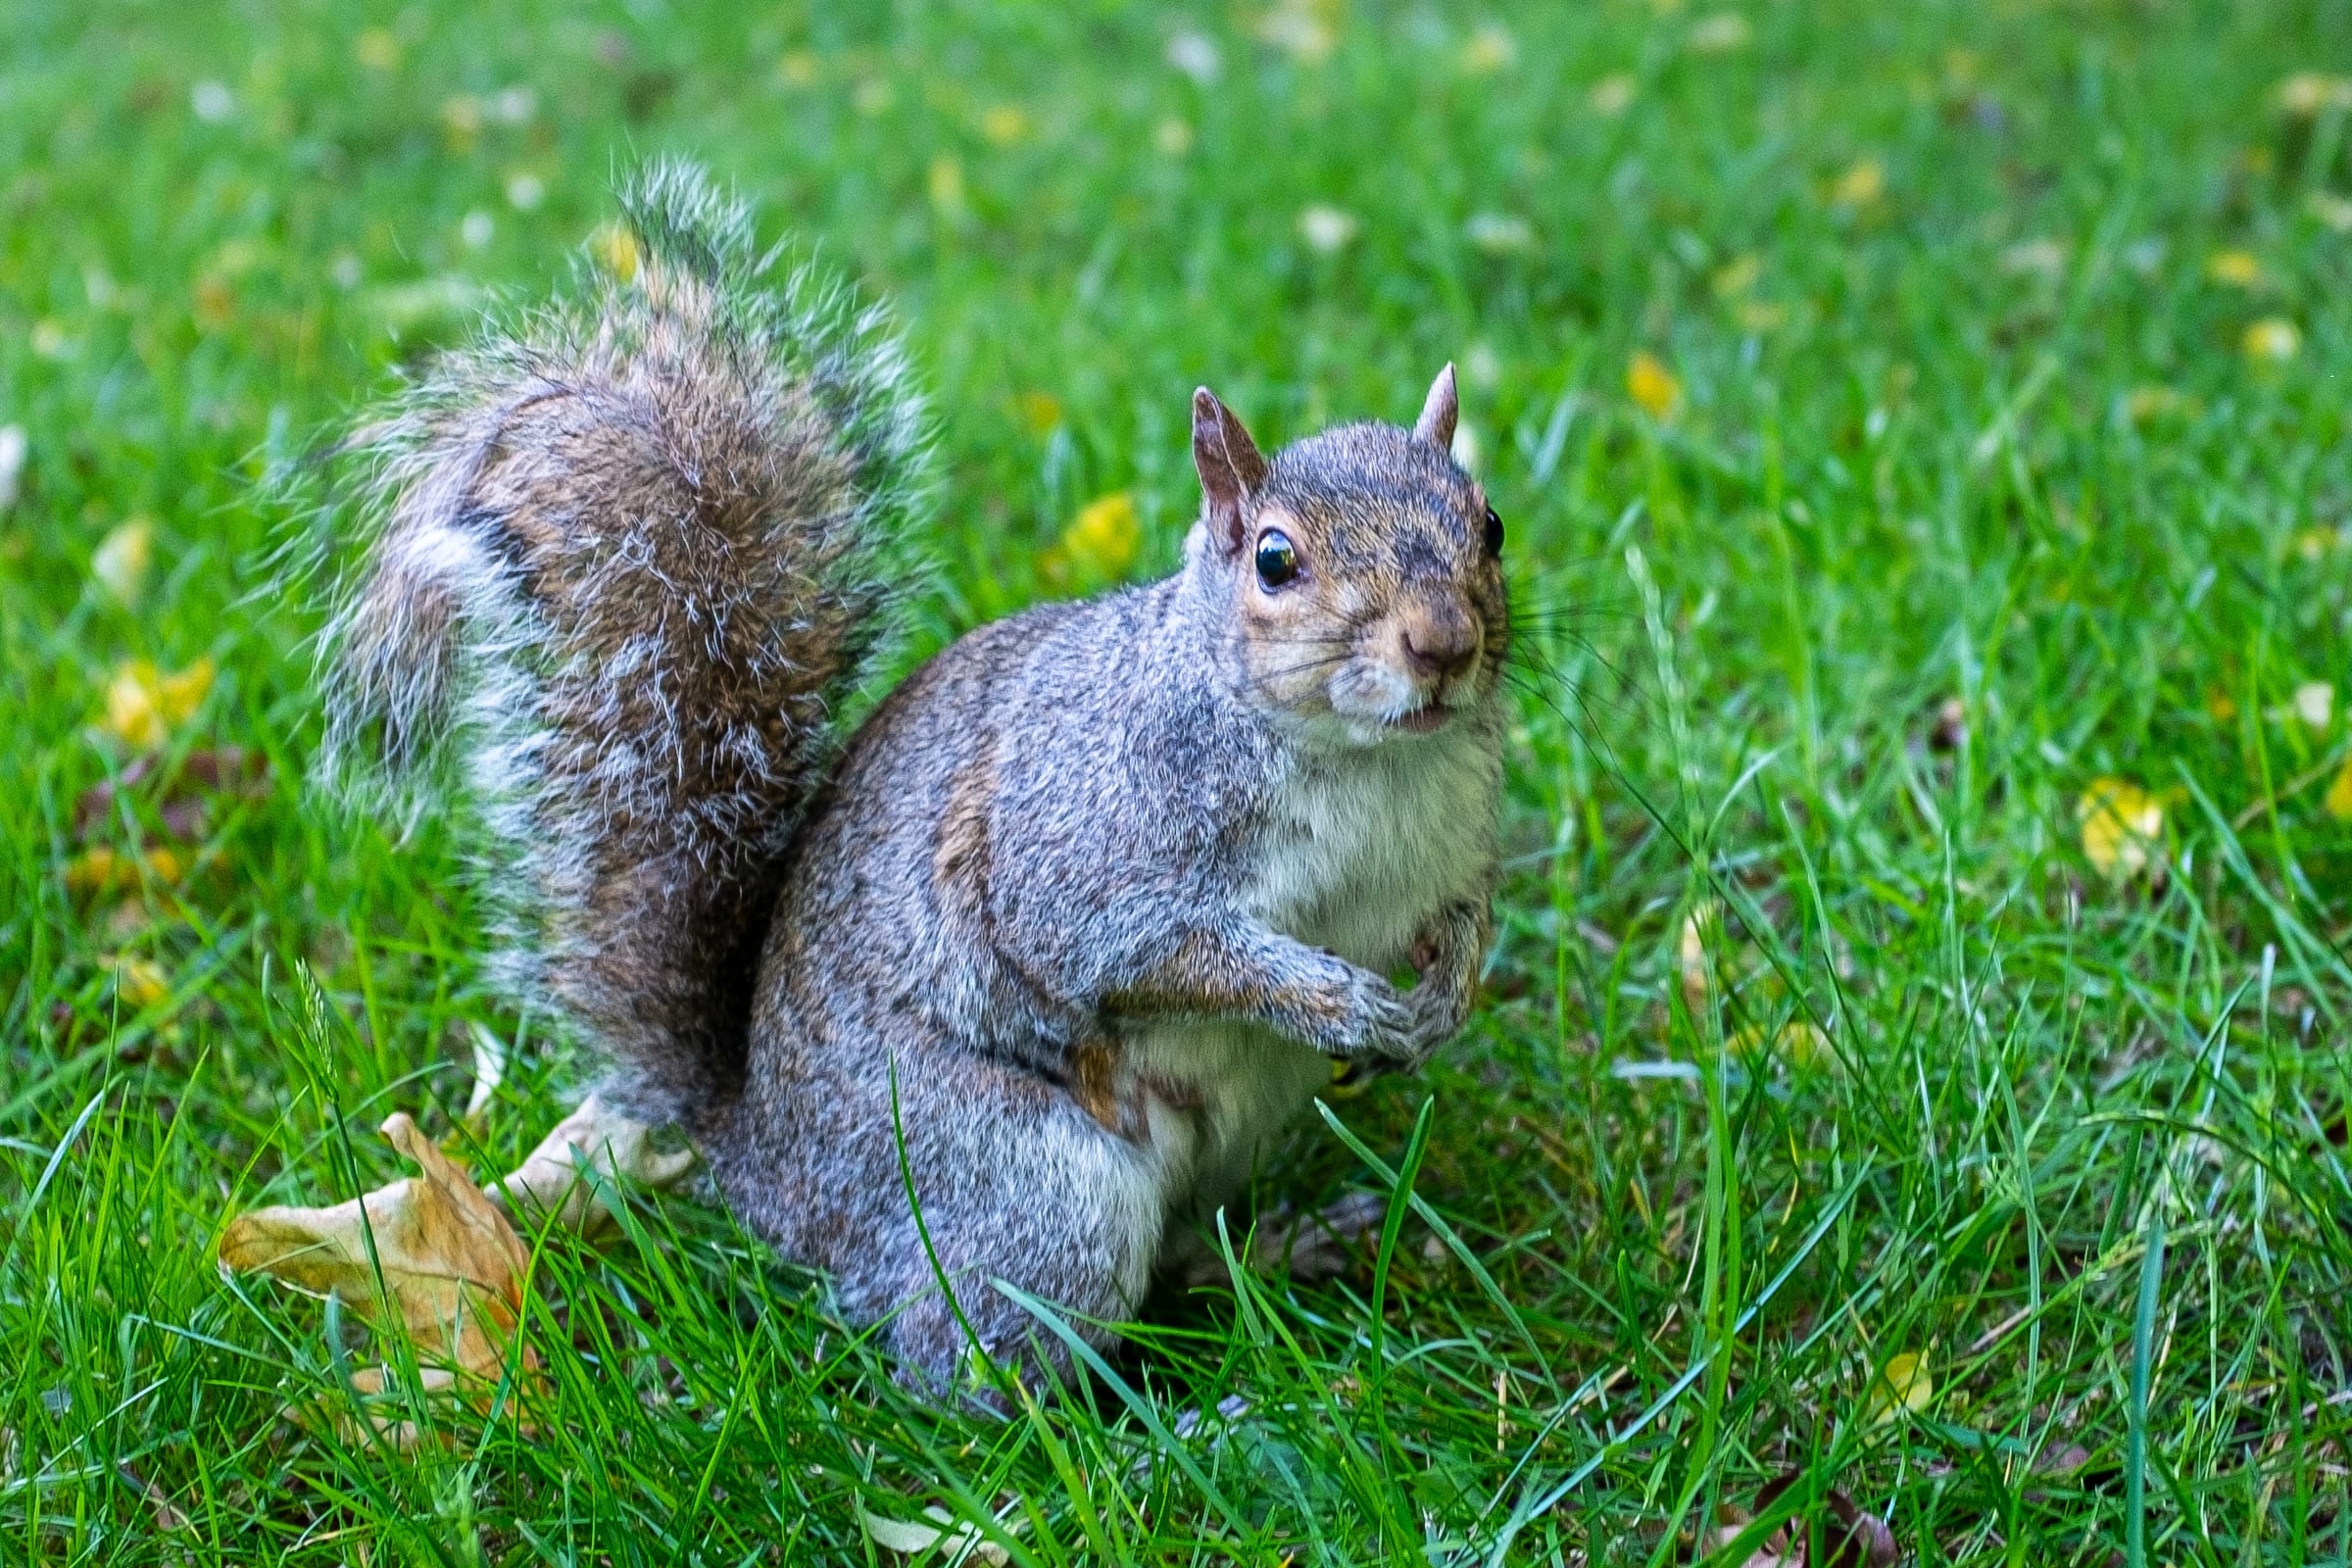 A brown squirrel looking directly at the camera.